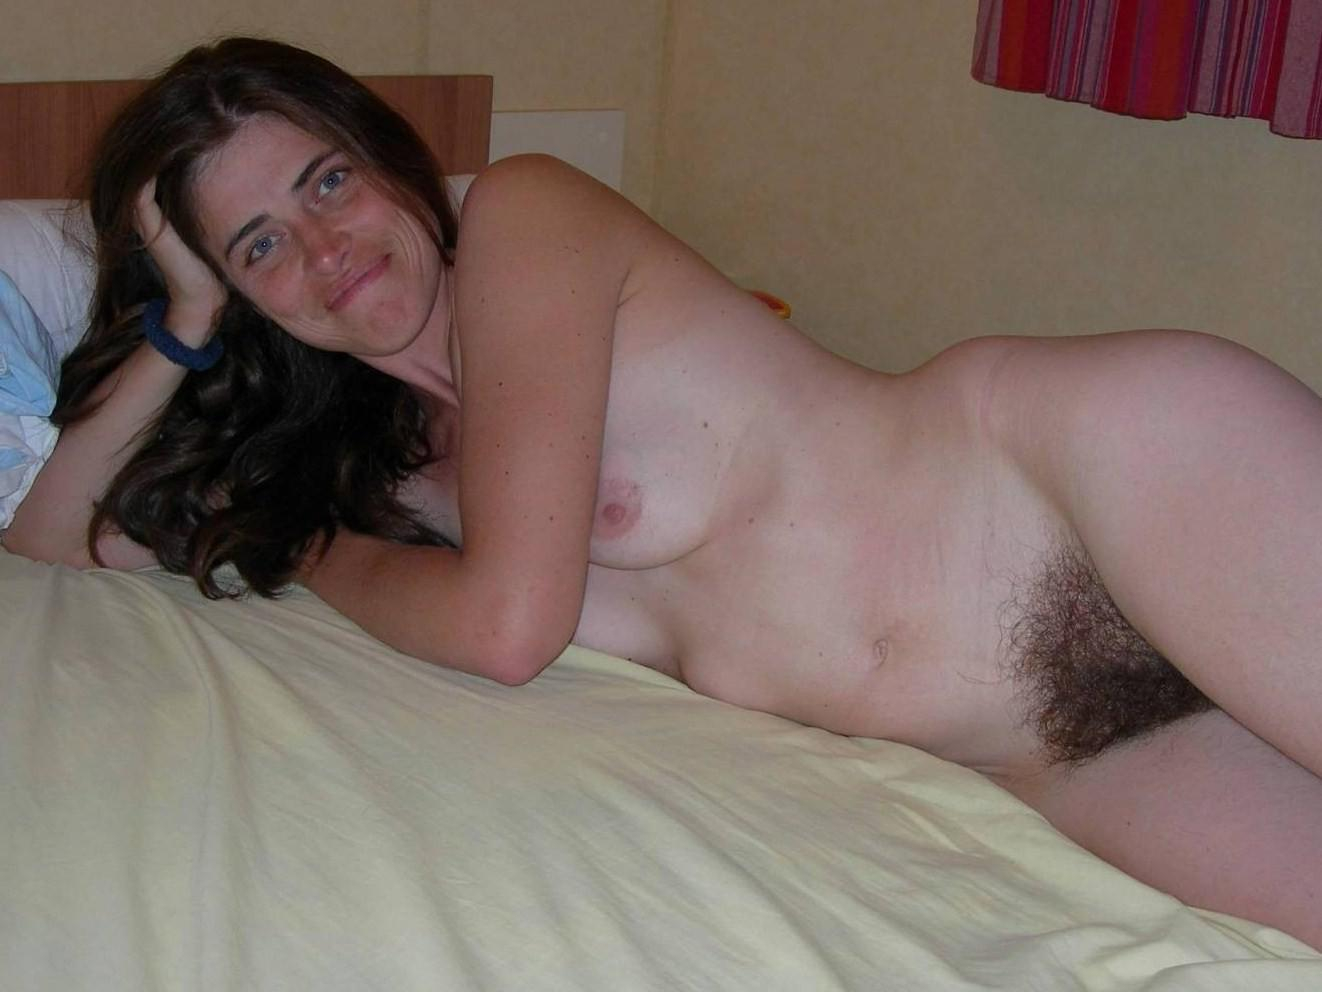 She and her wonderful hairy pussy 5 - N